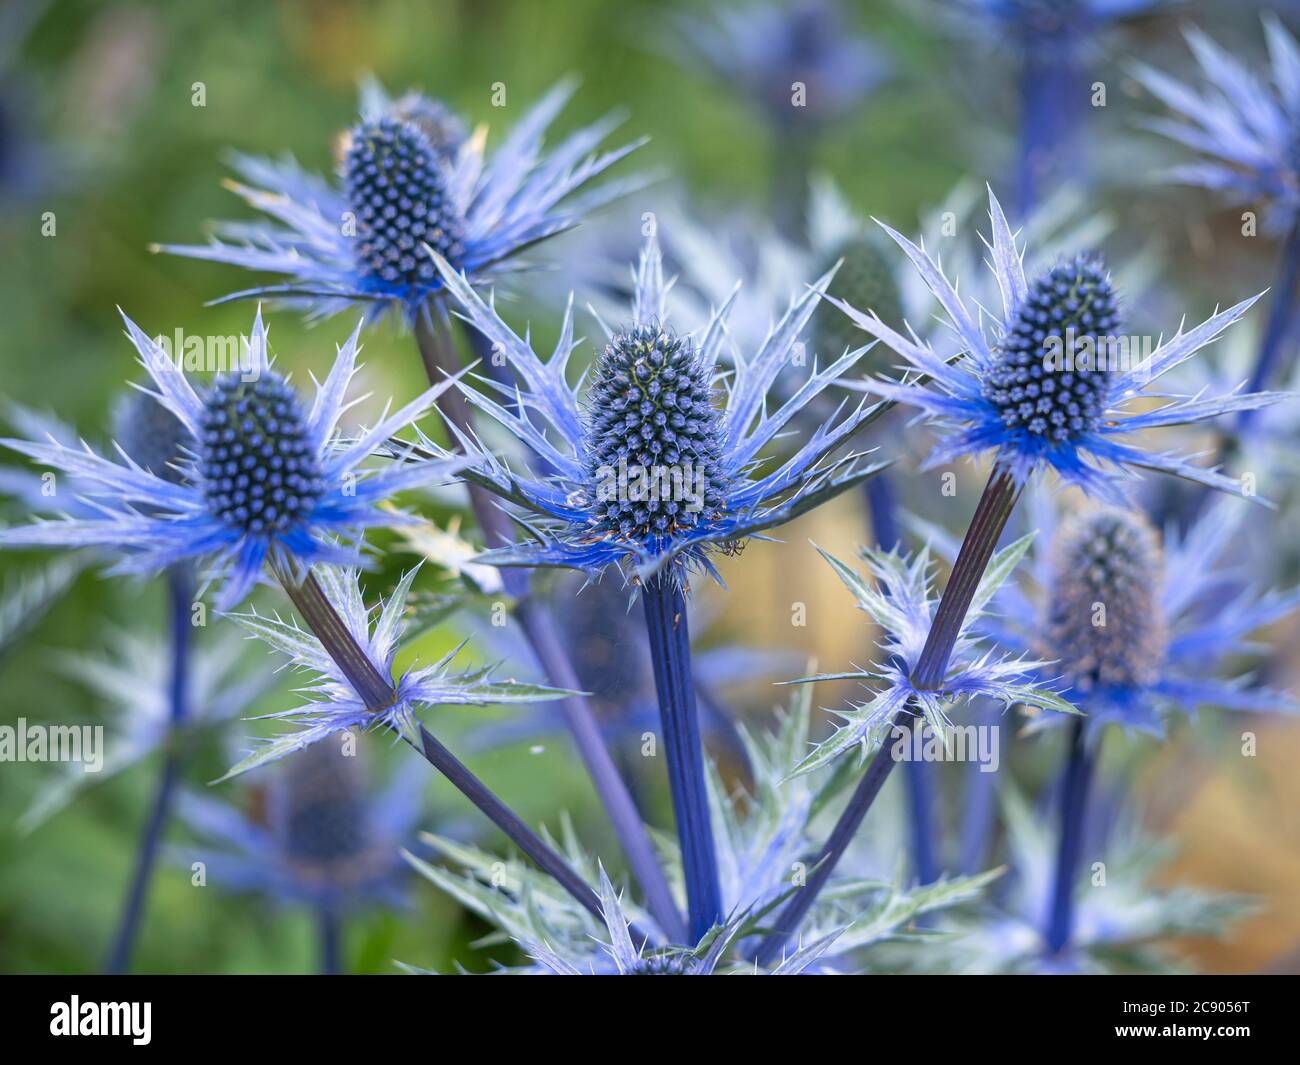 Closeup of the flowers and bracts of sea holly, Eryngium x zabelii variety Big Blue Stock Photo